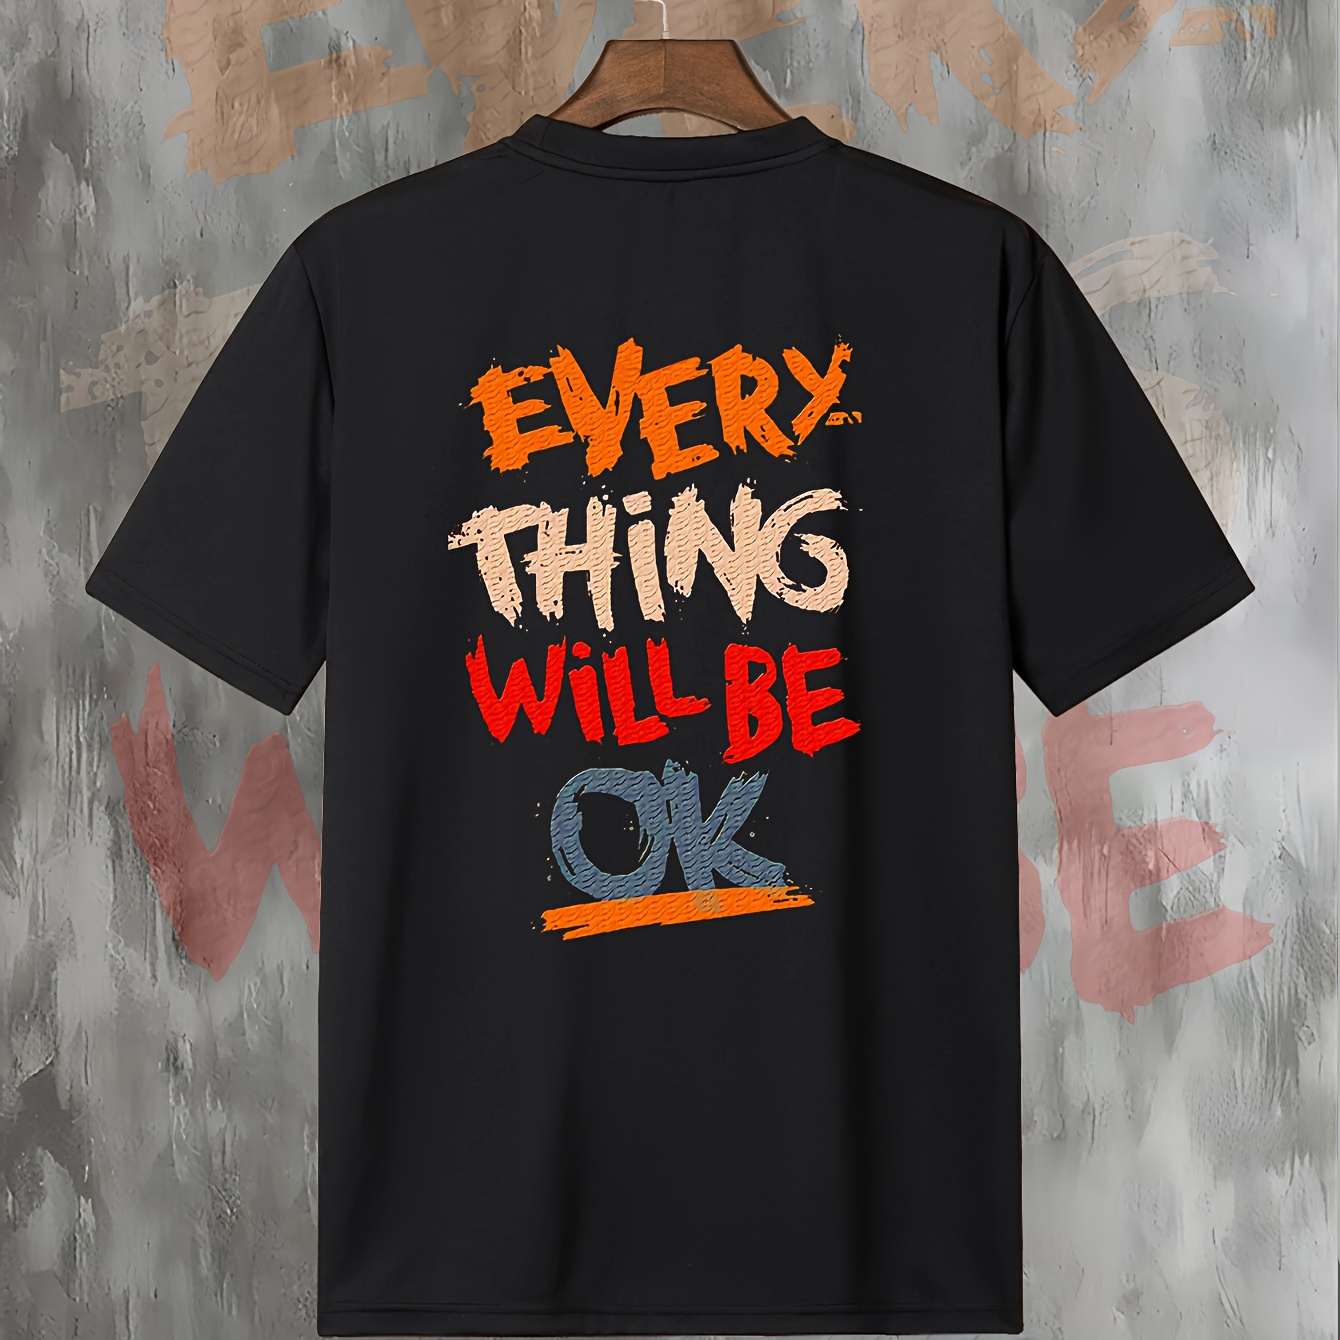 

Everything Will Be Ok Print Men's Round Neck Short Sleeve Tee Fashion Regular Fit T-shirt Top For Spring Summer Holiday